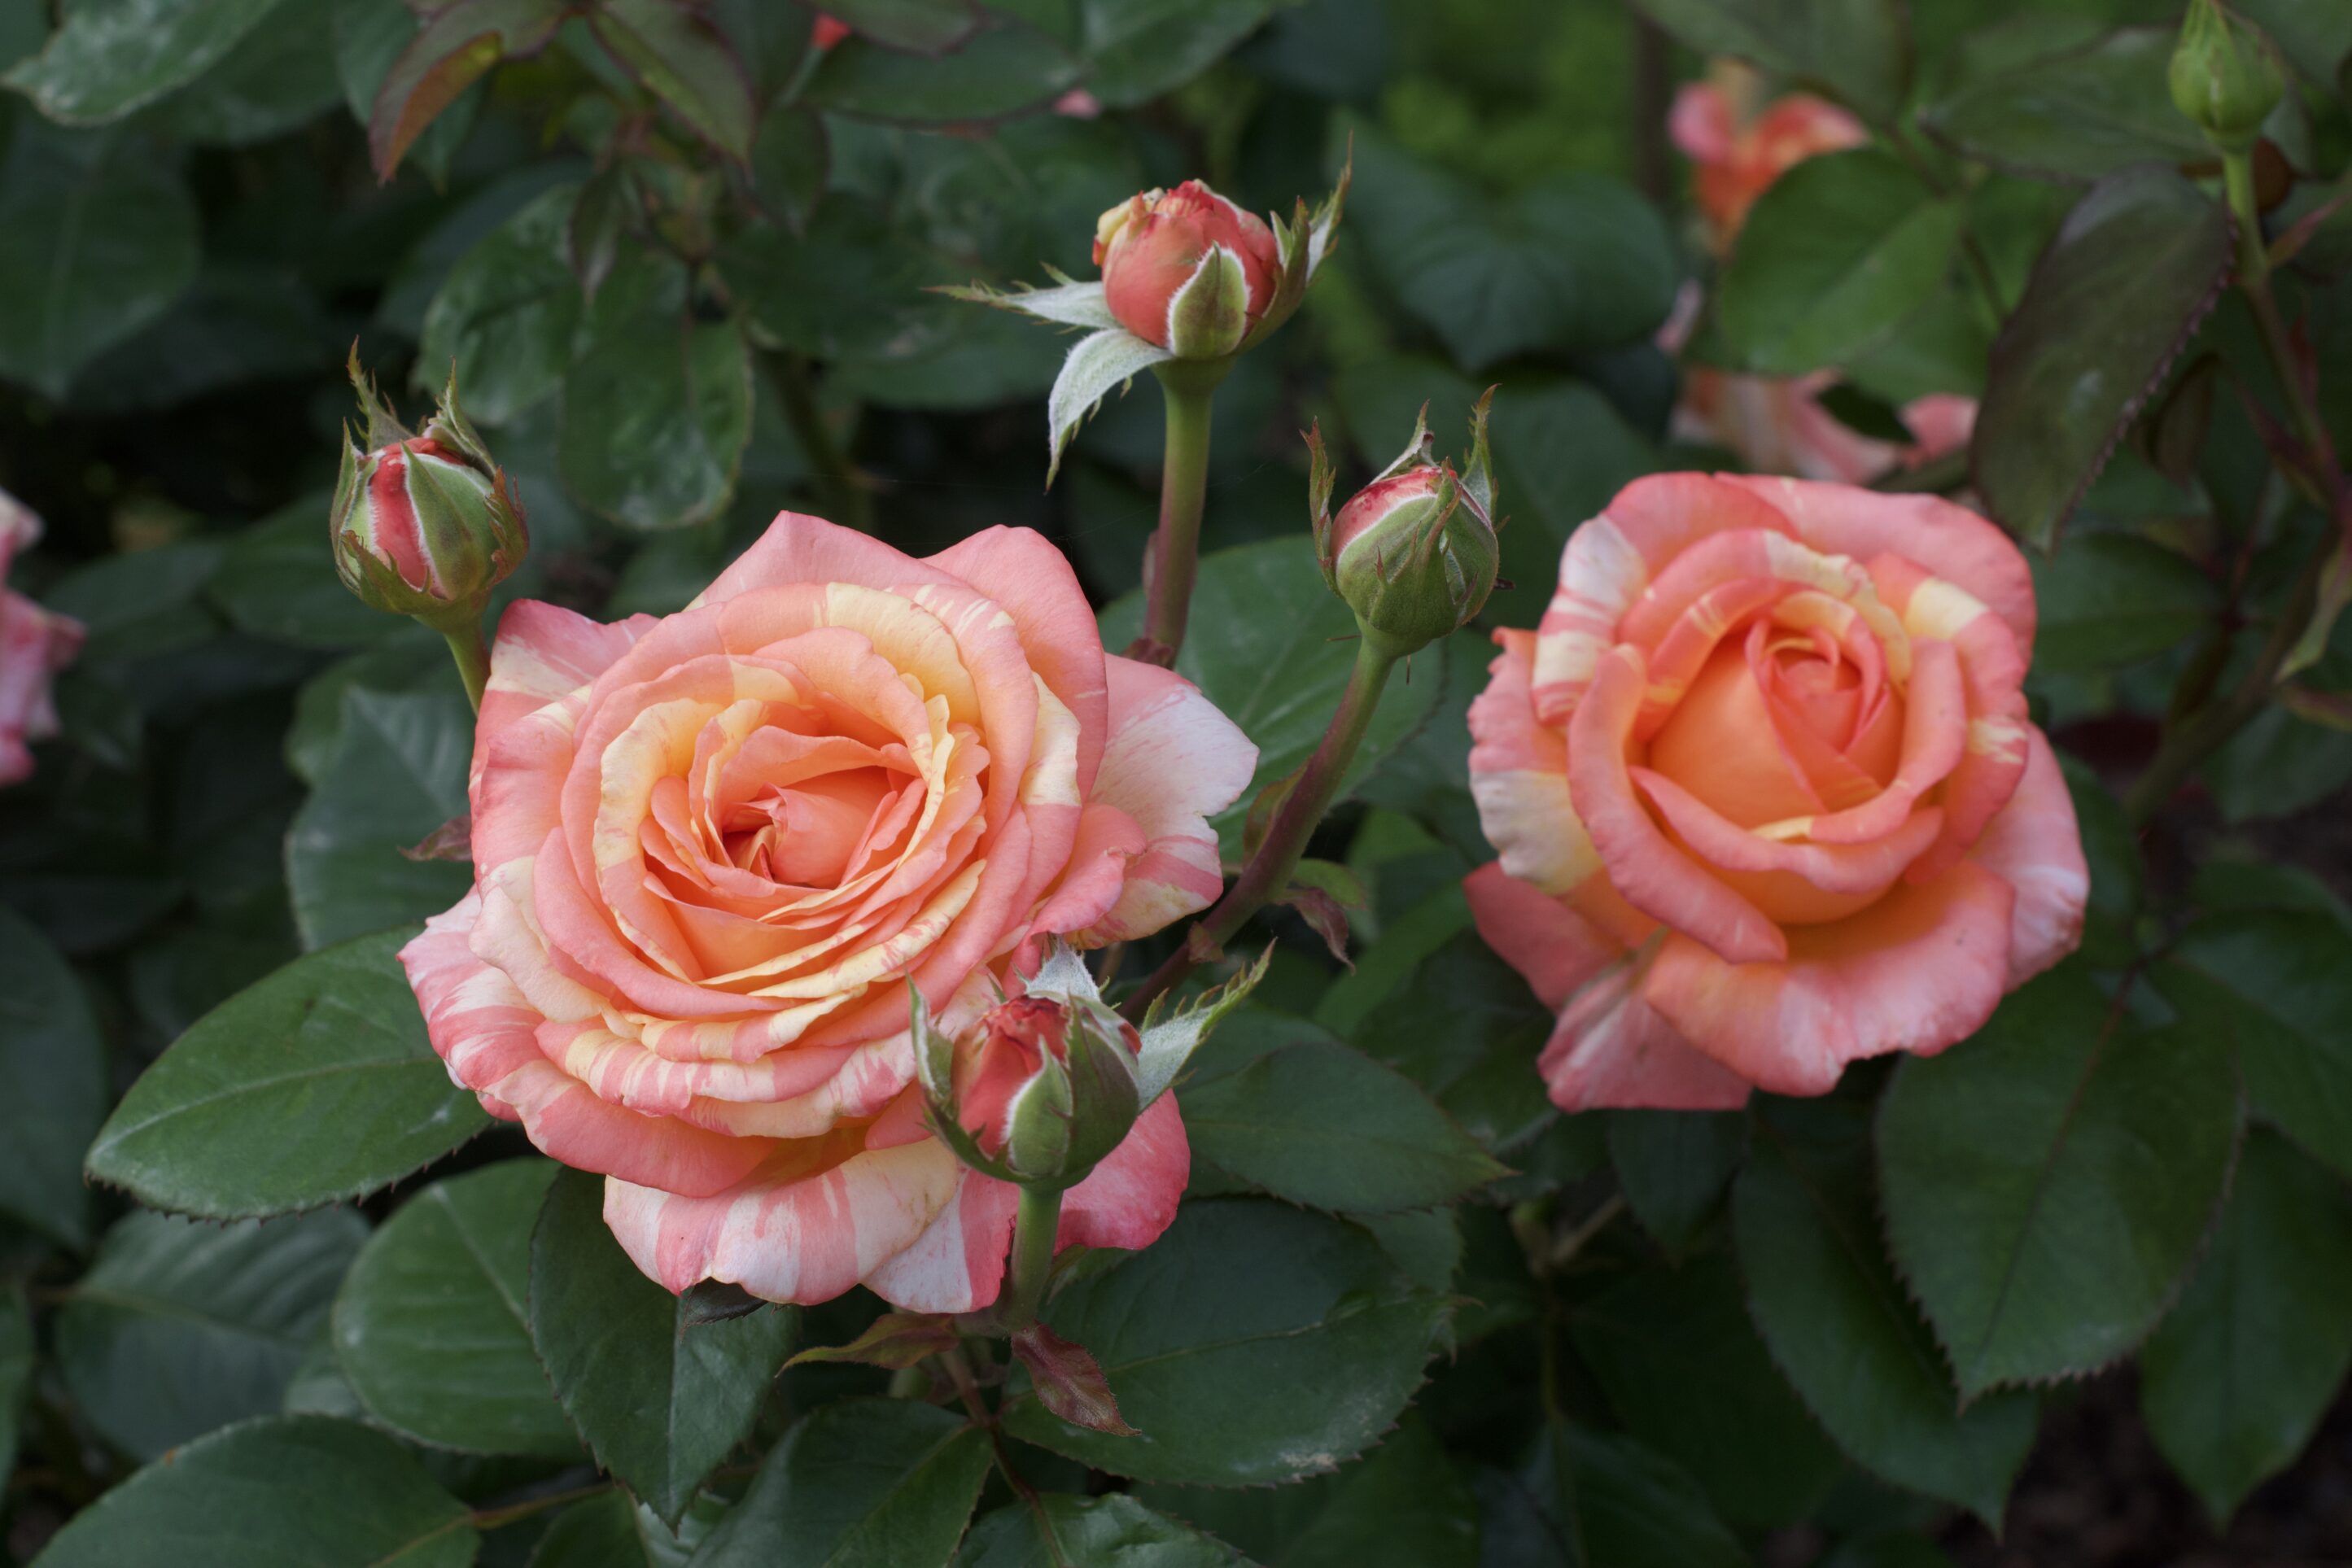 Peach Swirl rose for zone 6 and zone 7